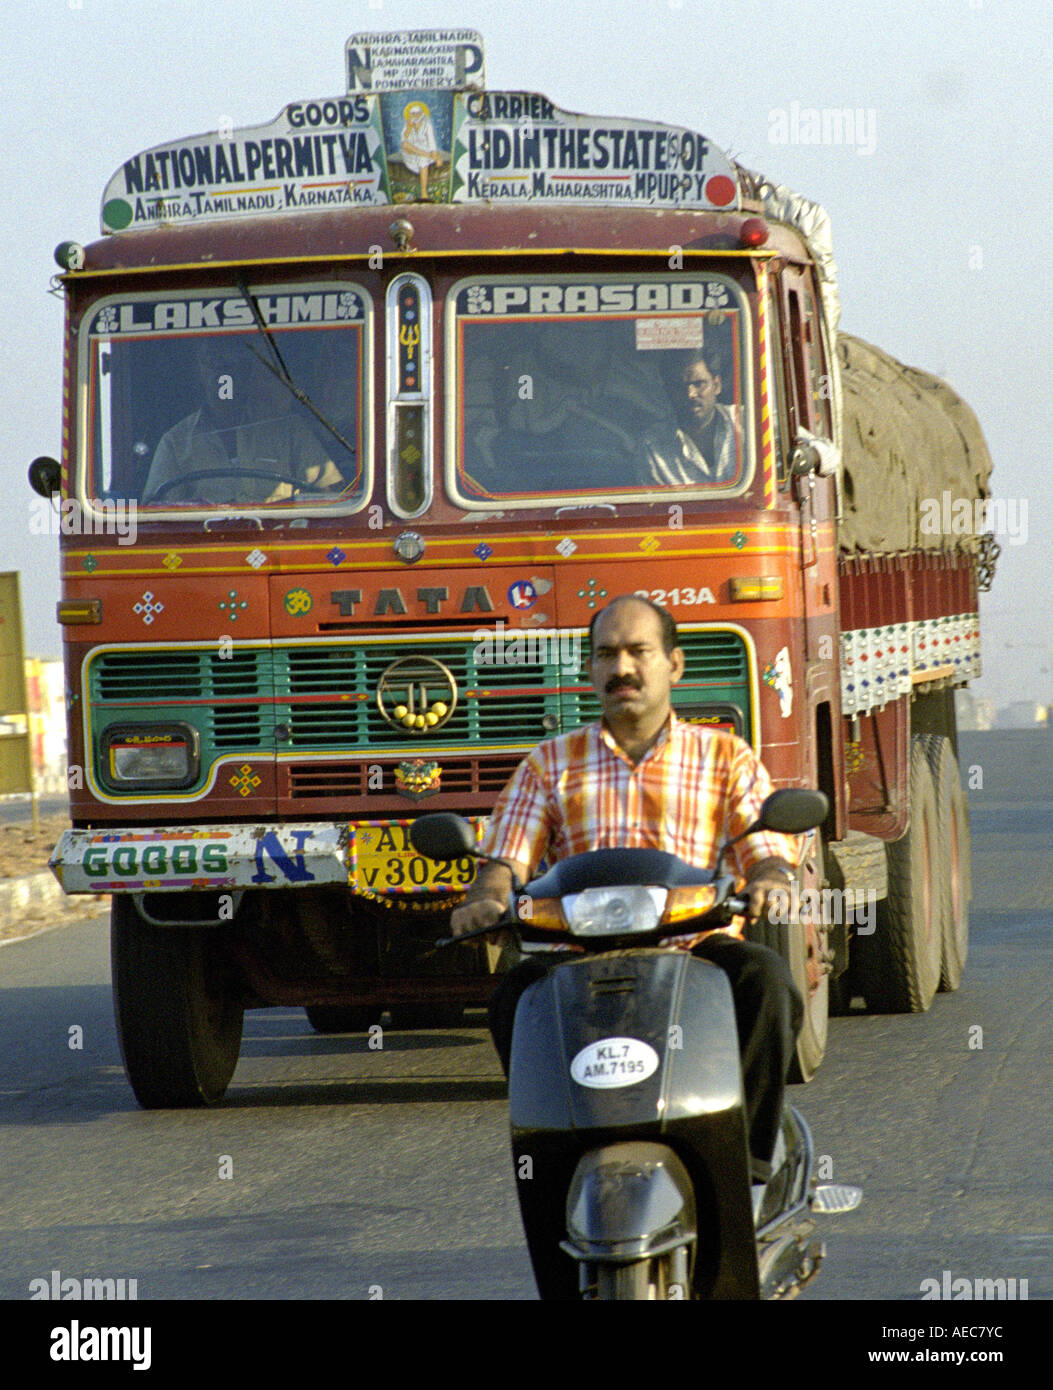 A view of Cochin city and highway, Kerala, India, with a truck and motorist. Stock Photo